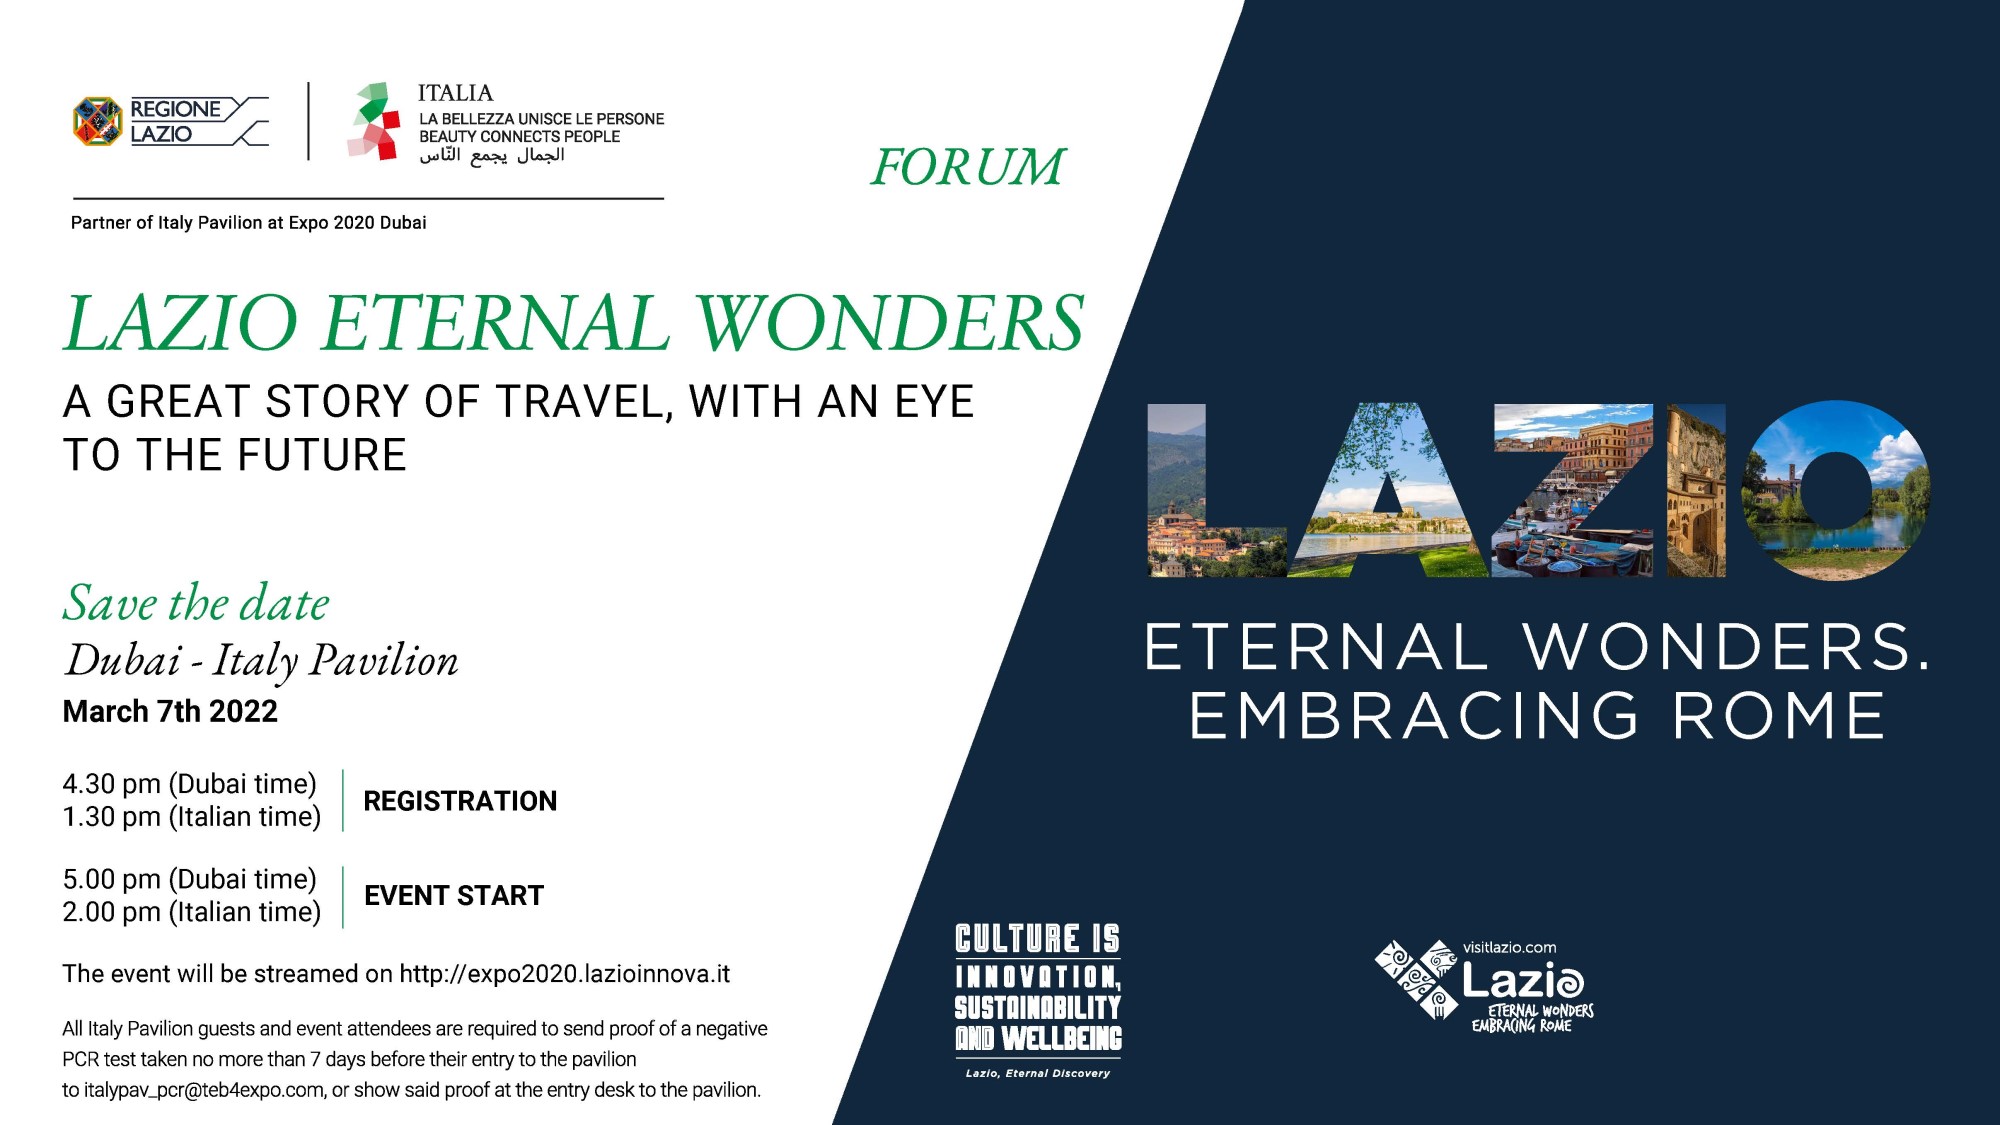 Lazio Eternal Wonders – A Great Story of Travel with an Eye to the Future